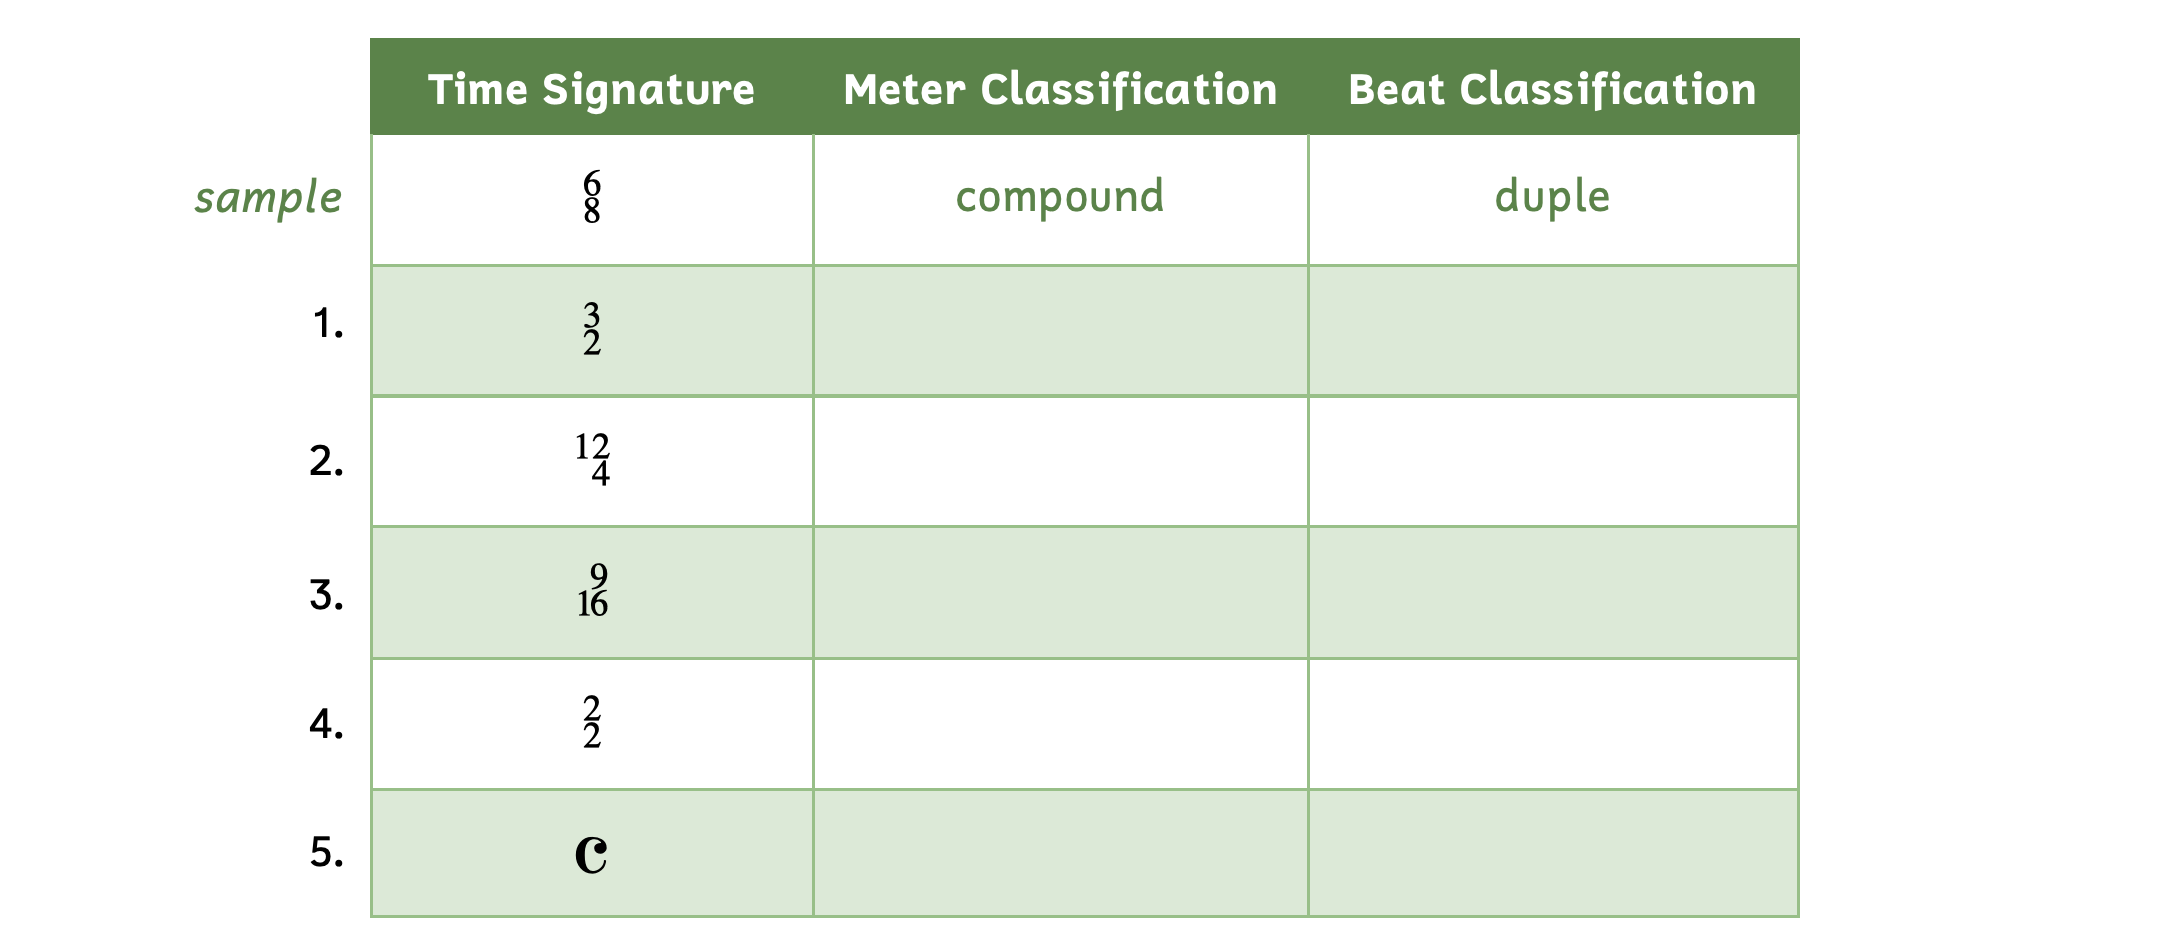 The first column lists the time signature. The second column asks for the meter classification. The third column asks for the beat classification. The sample is the time signature 6-8. The meter classification is compound. The beat classification is duple. Number 1, time signature 3-2. Number 2, time signature 12-4. Number 3, time signature 9-16. Number 4, time signature 2-2. Number 5, time signature, common time.